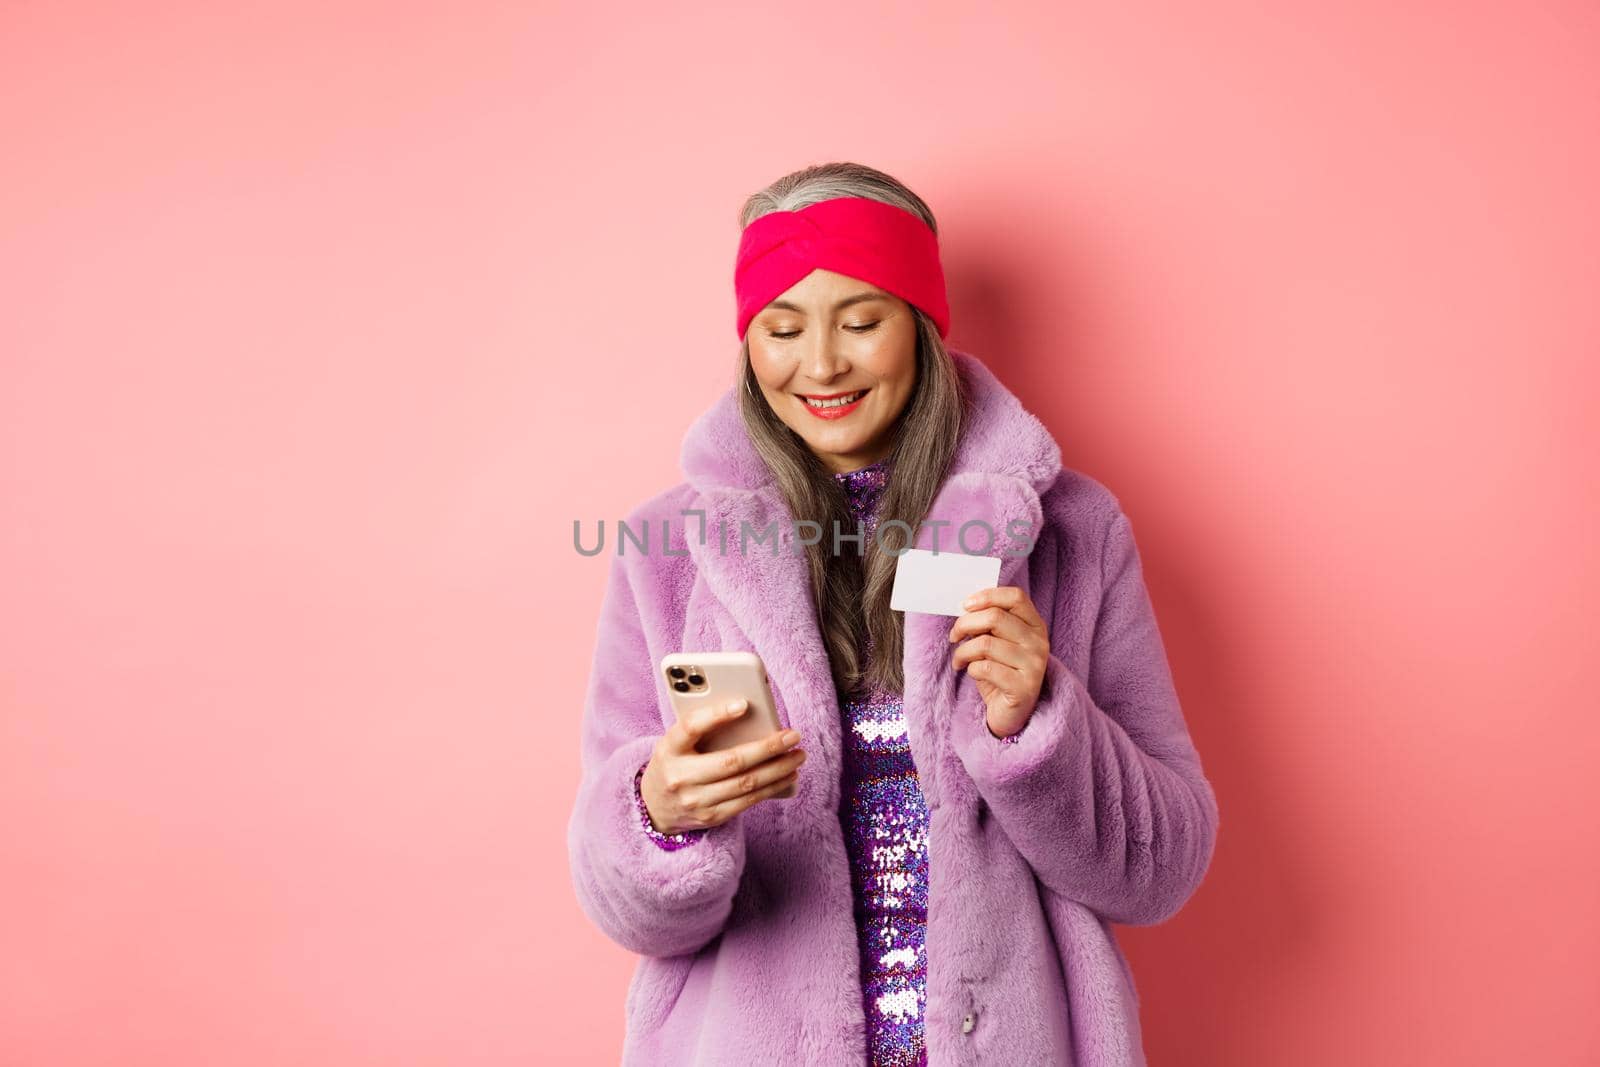 Online shopping and fashion concept. Stylish asian elderly woman standing in fashionable purple coat and making payment on smartphone, holding plastic credit card, pink background.